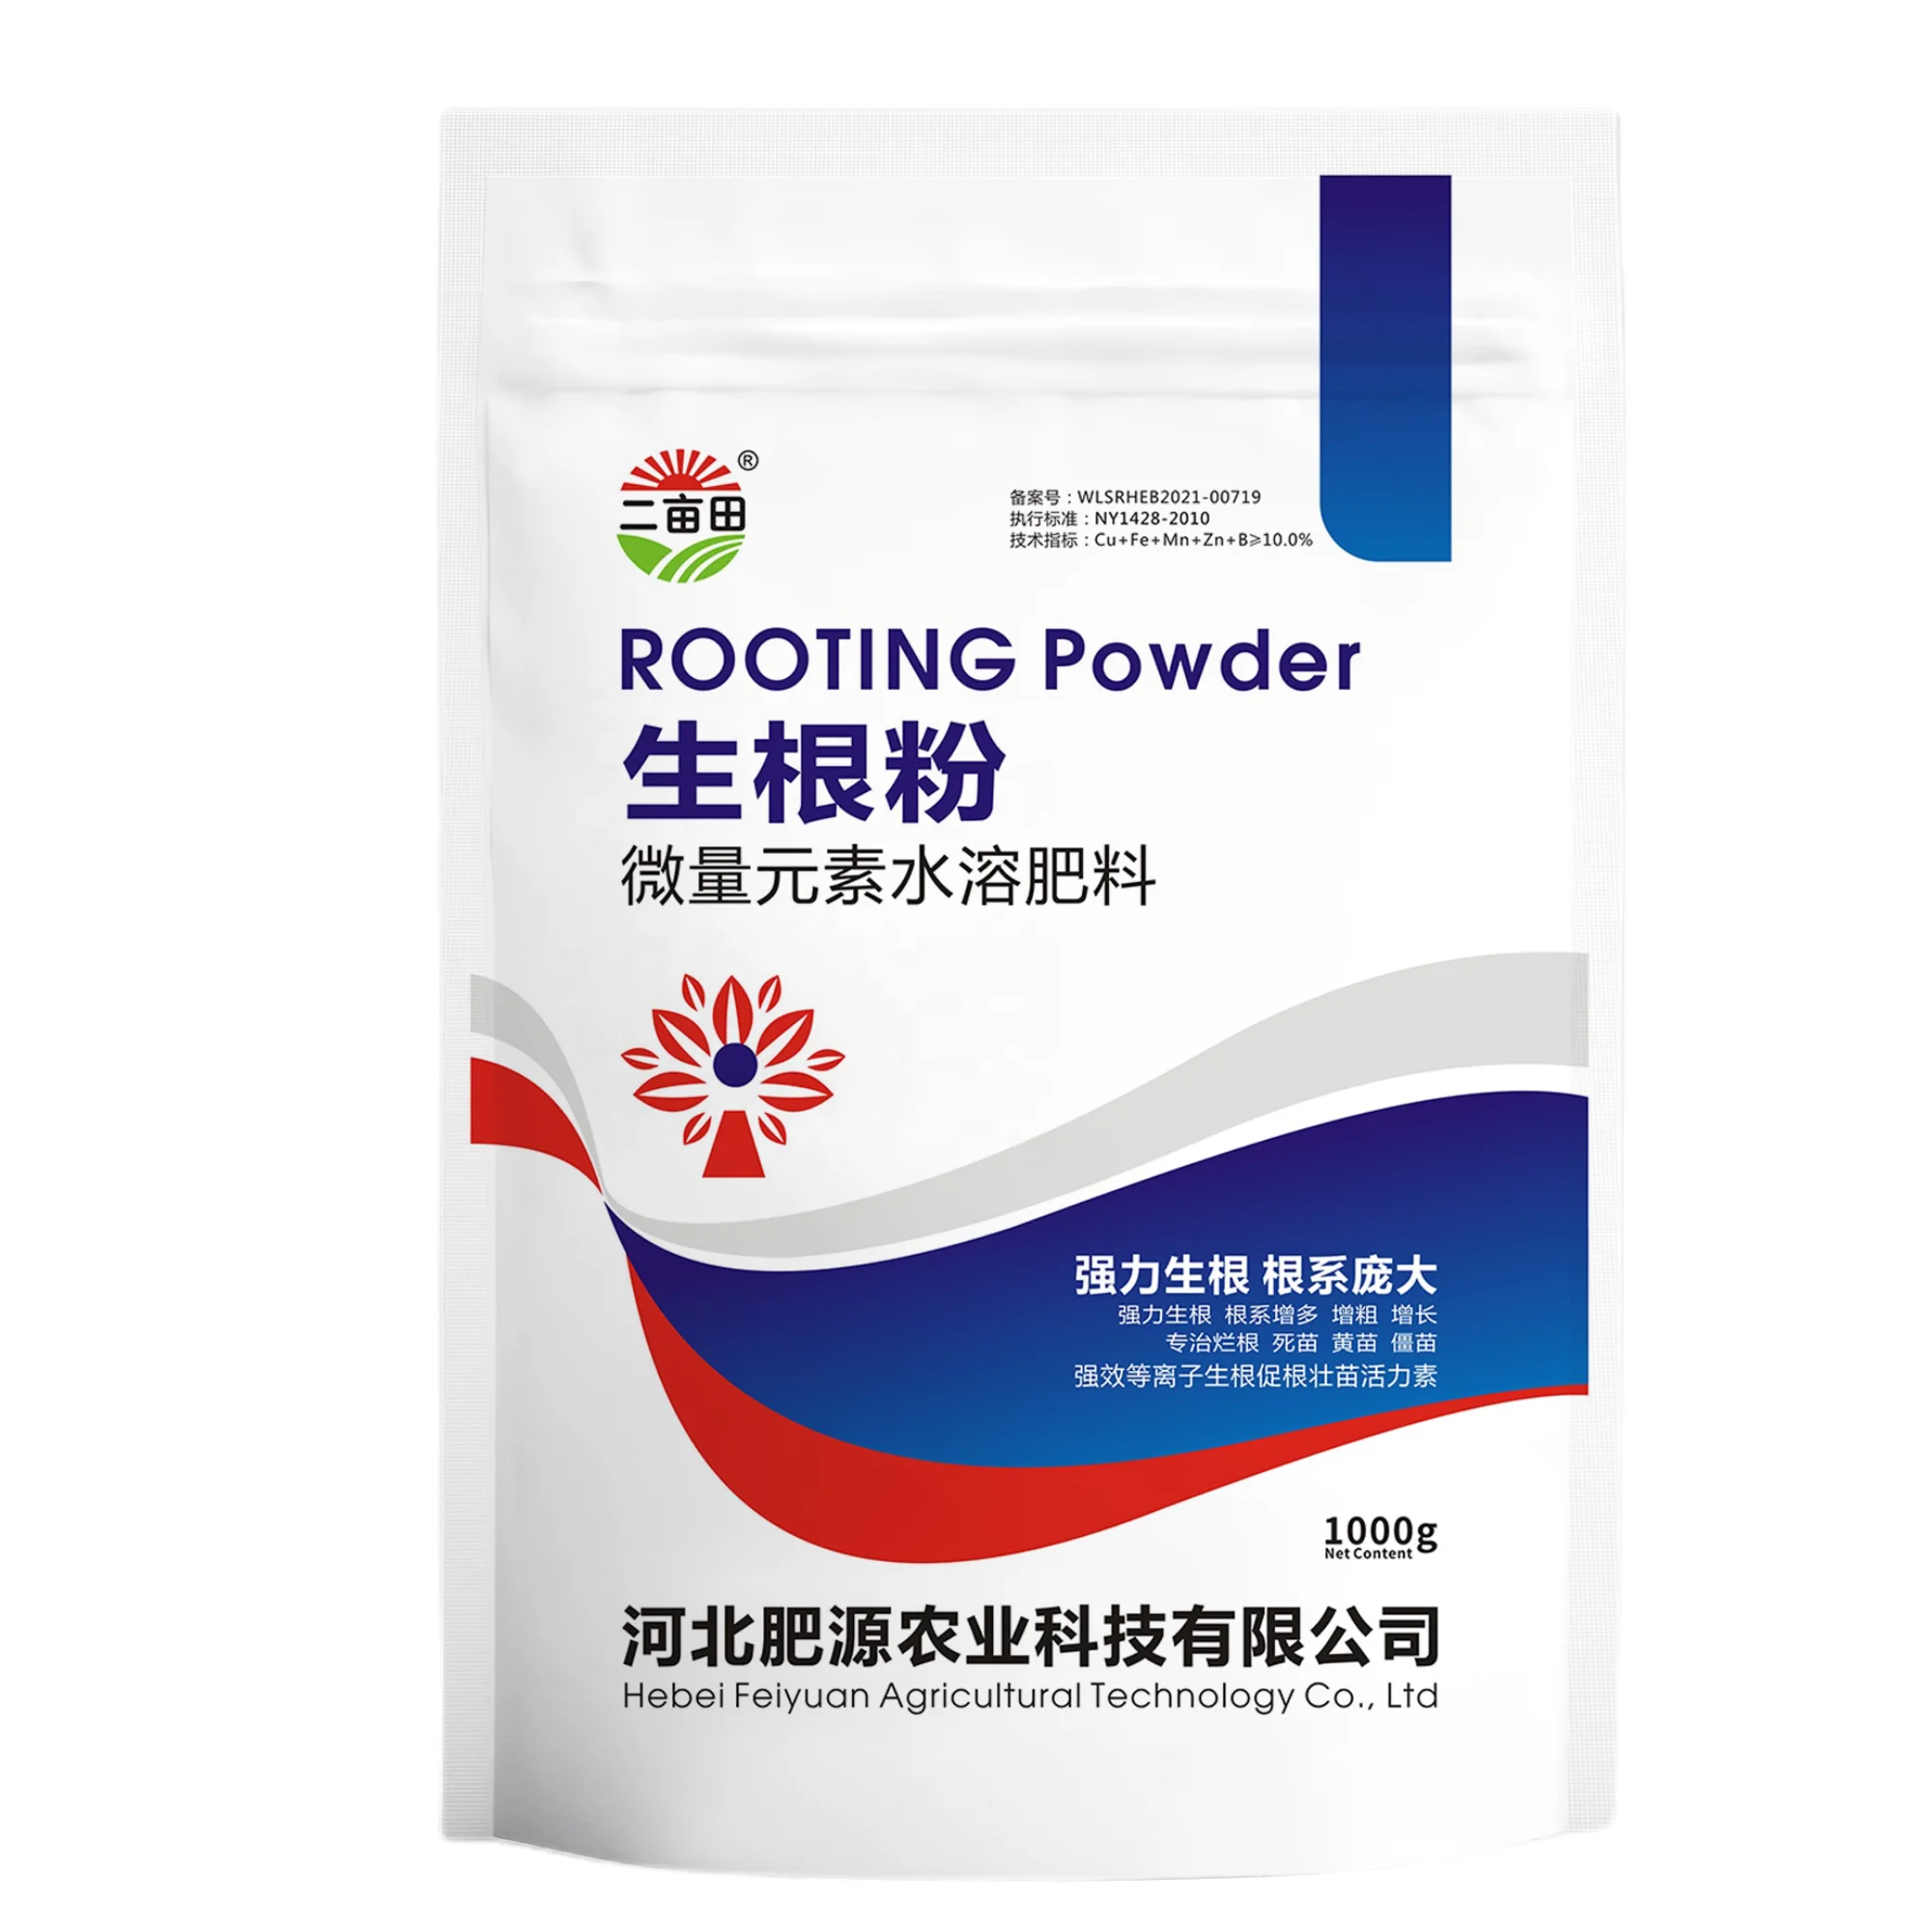 Rooting powder      Water soluble fertilizer      Factory direct sale      Rooting and strengthening seedlings